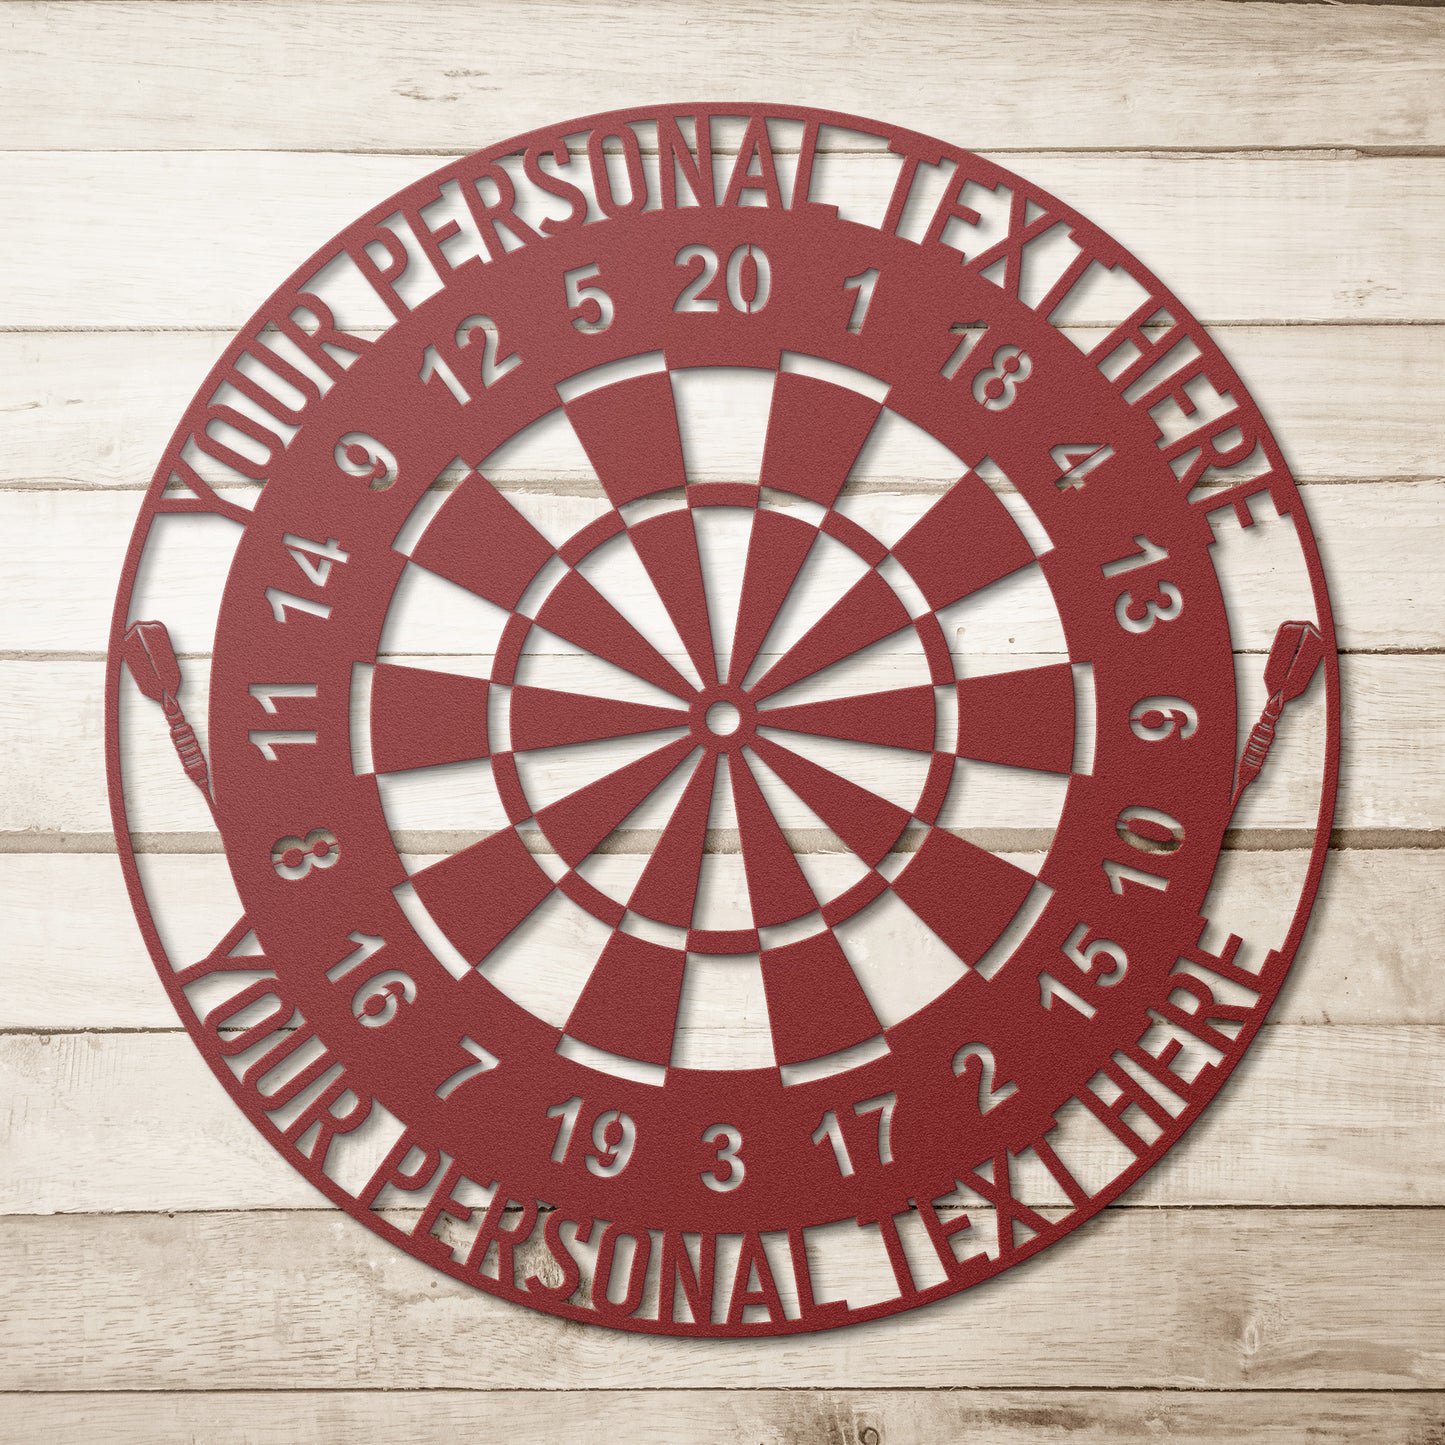 Personalized Dart Board Name Metal Sign. Darts Lover Home Decor. Custom Darts Player Gift. Gamesroom Essential Gifts. Customized Dart Gifts